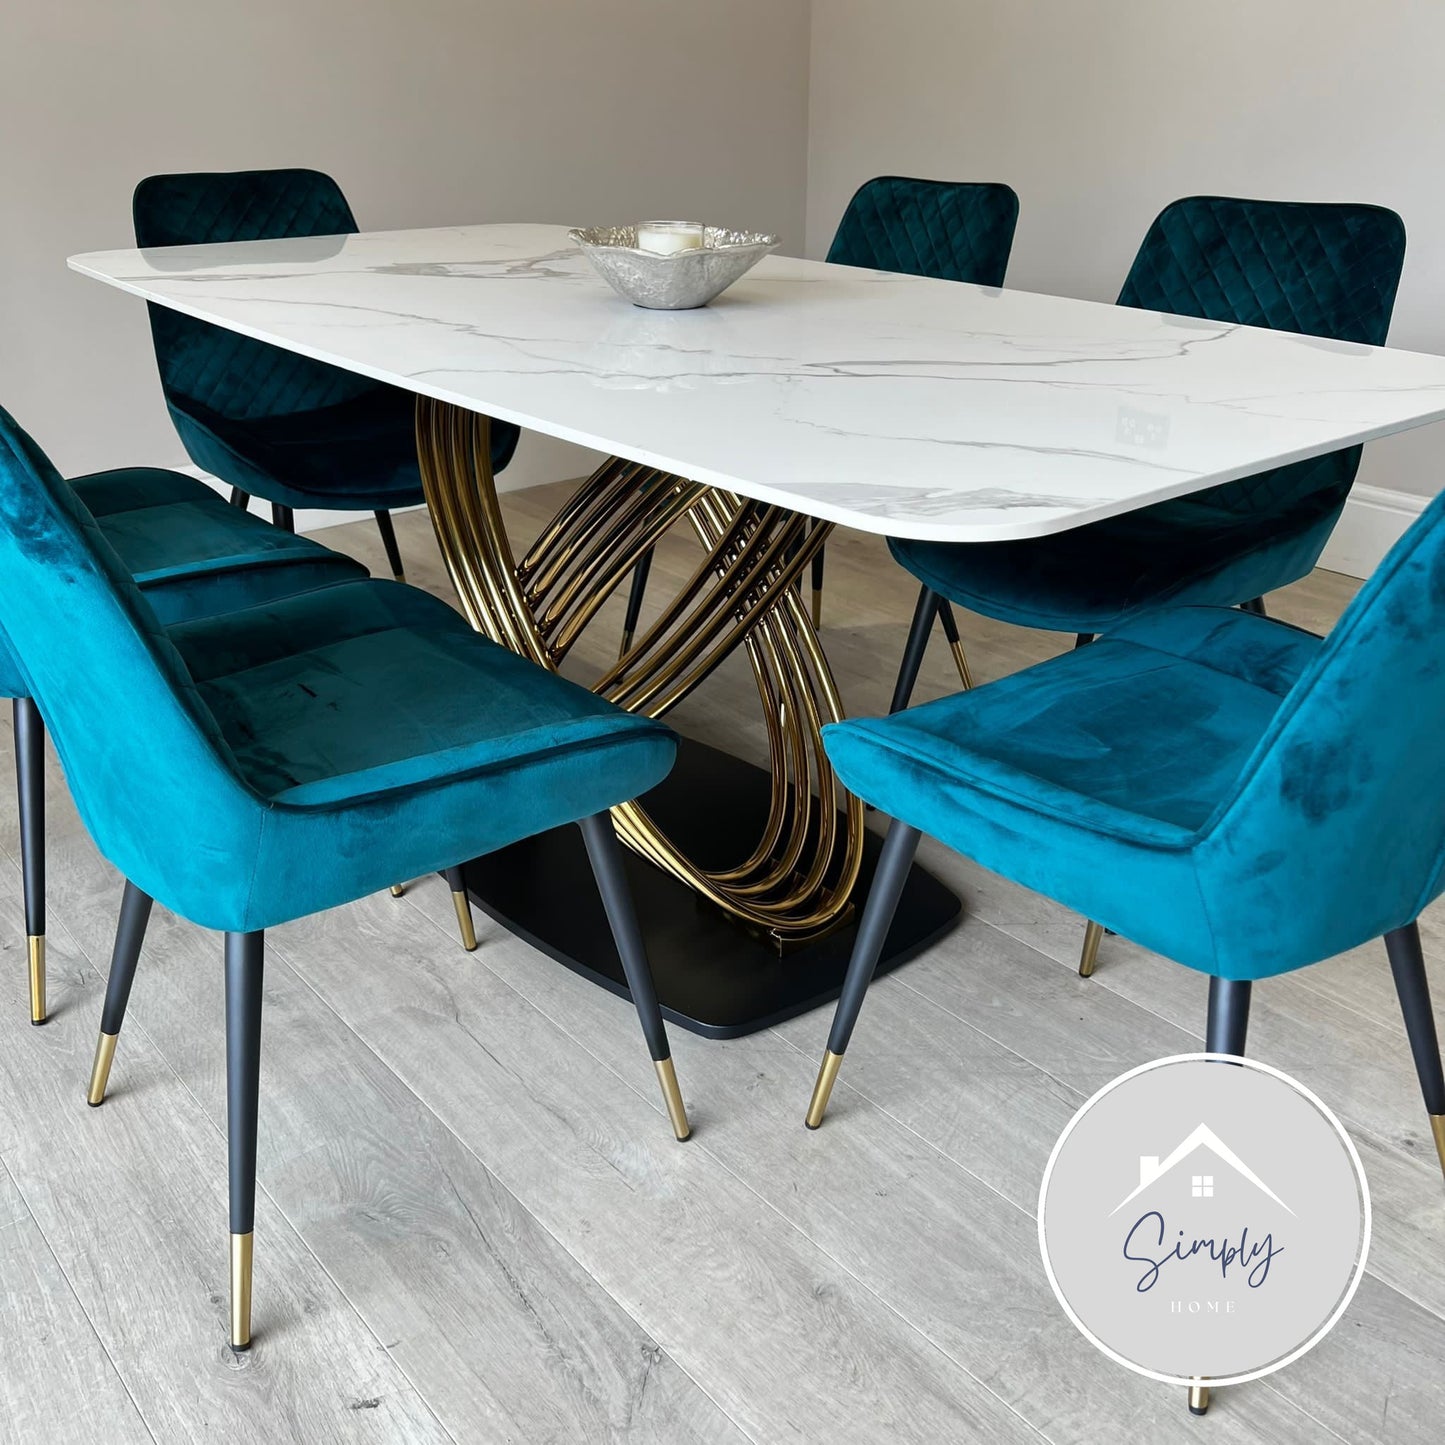 Orabella Gold White Marble Dining Table with Teal Milano Chairs